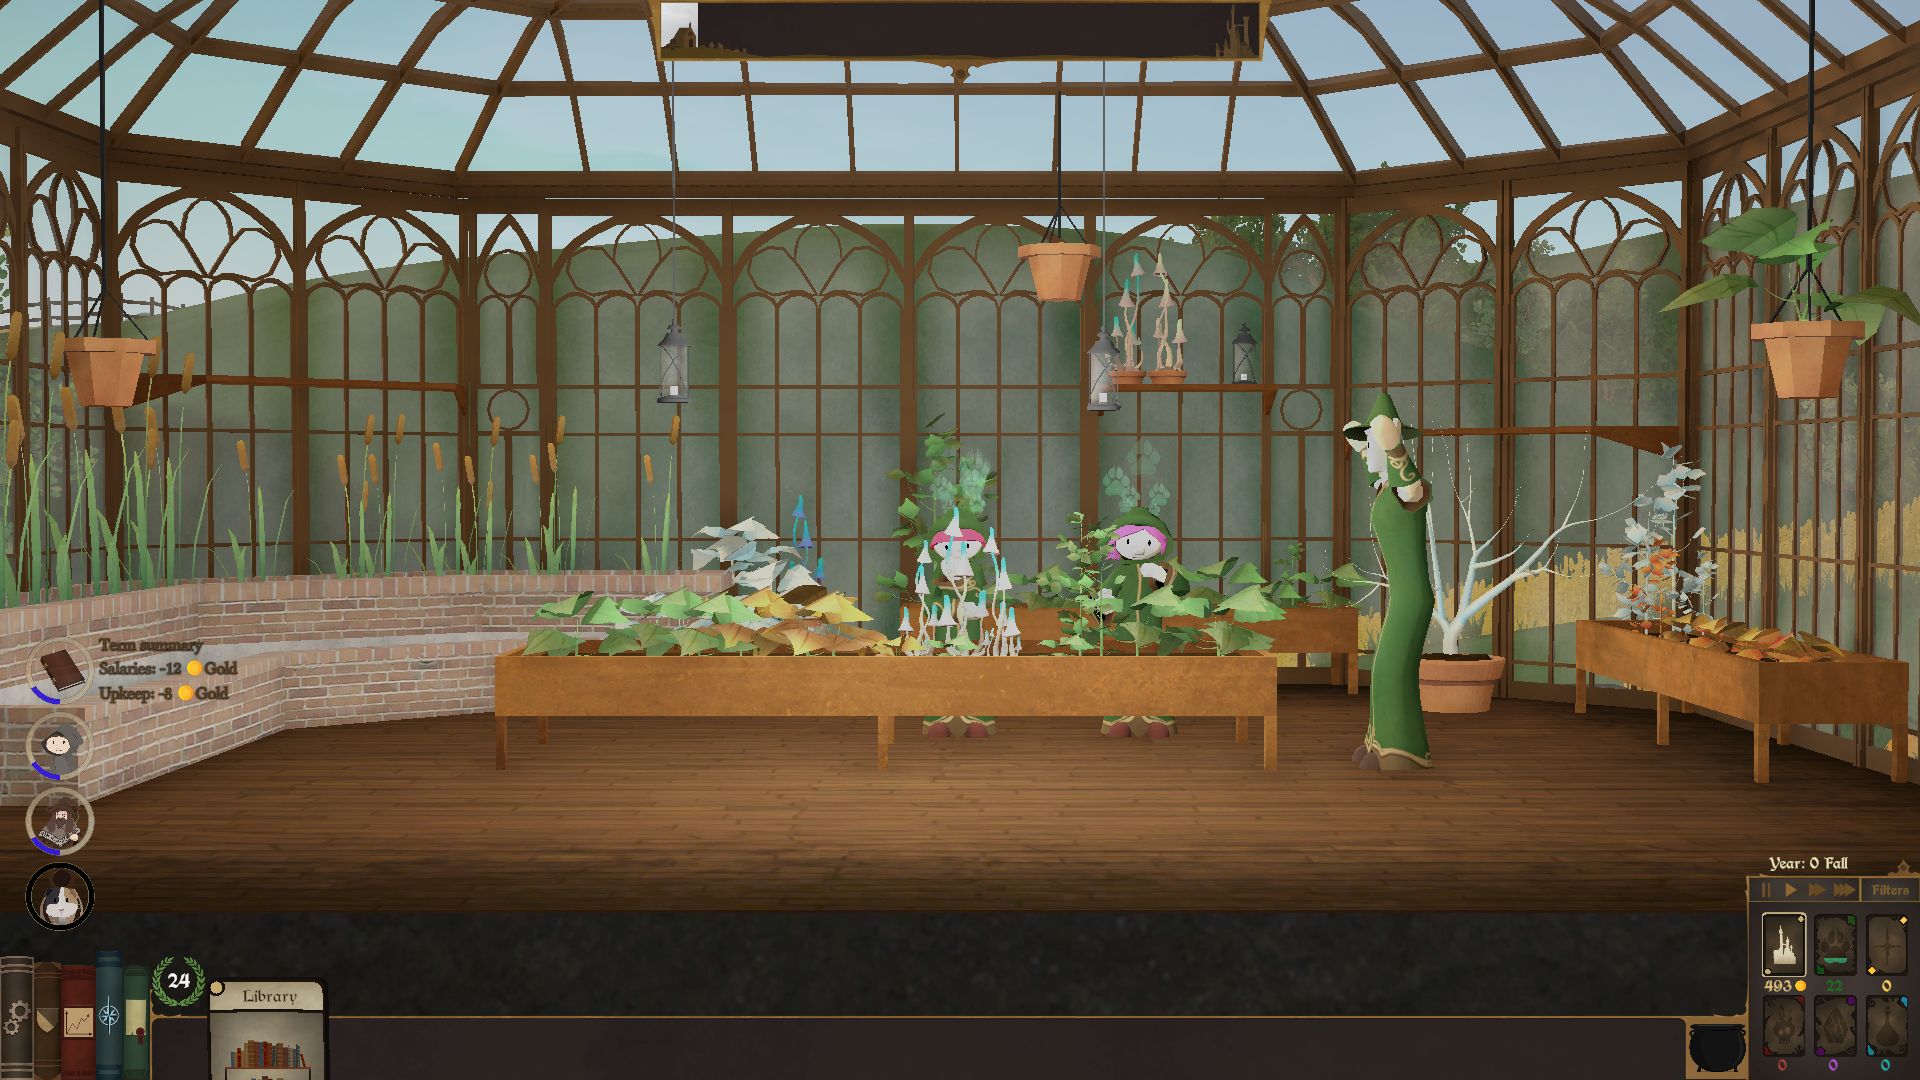 The greenhouse classroom in Spellcaster University